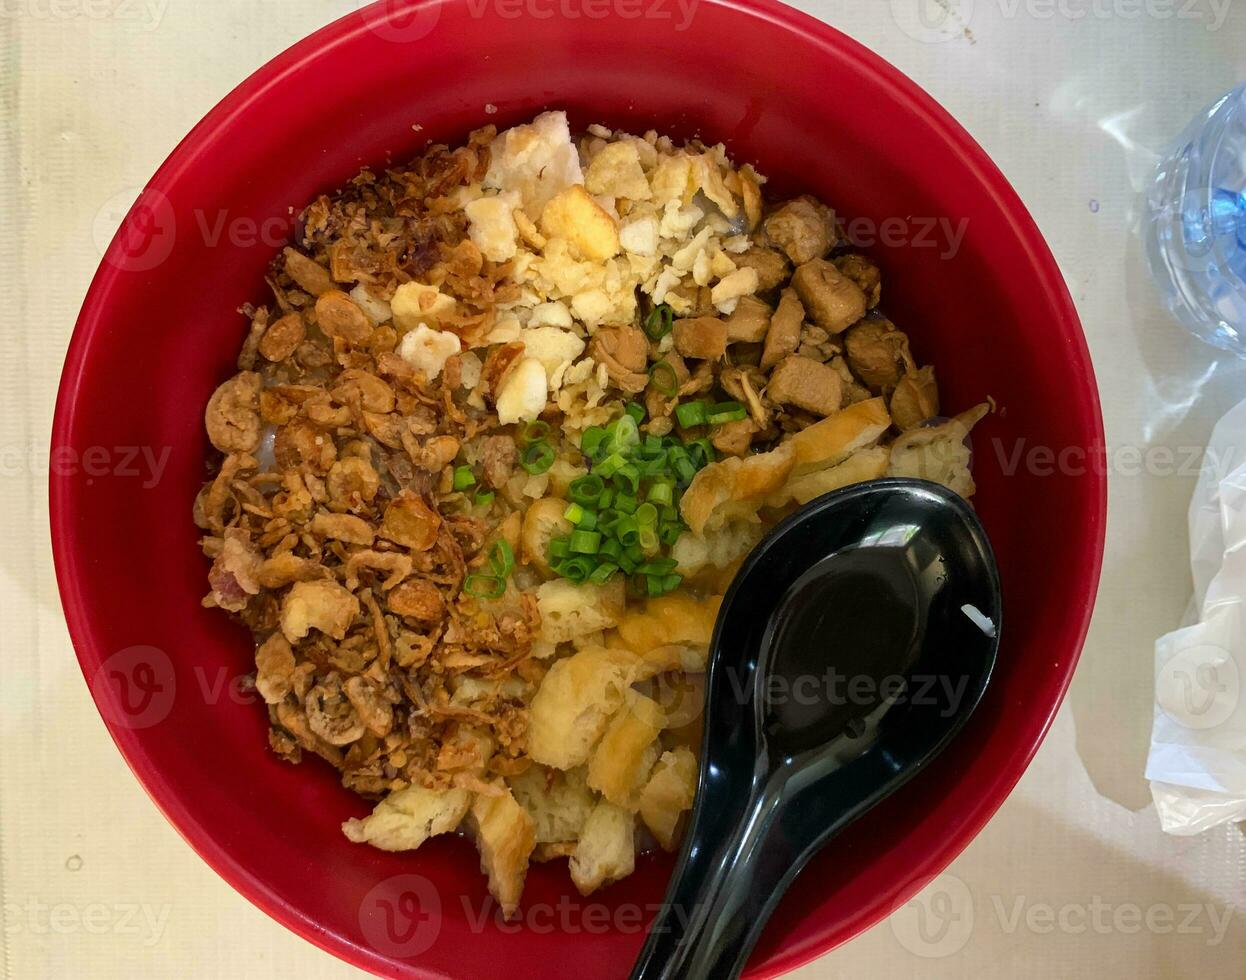 closeup bubur ayam or chicken rice porridge in red bowl with black spoon and topping, top view photo